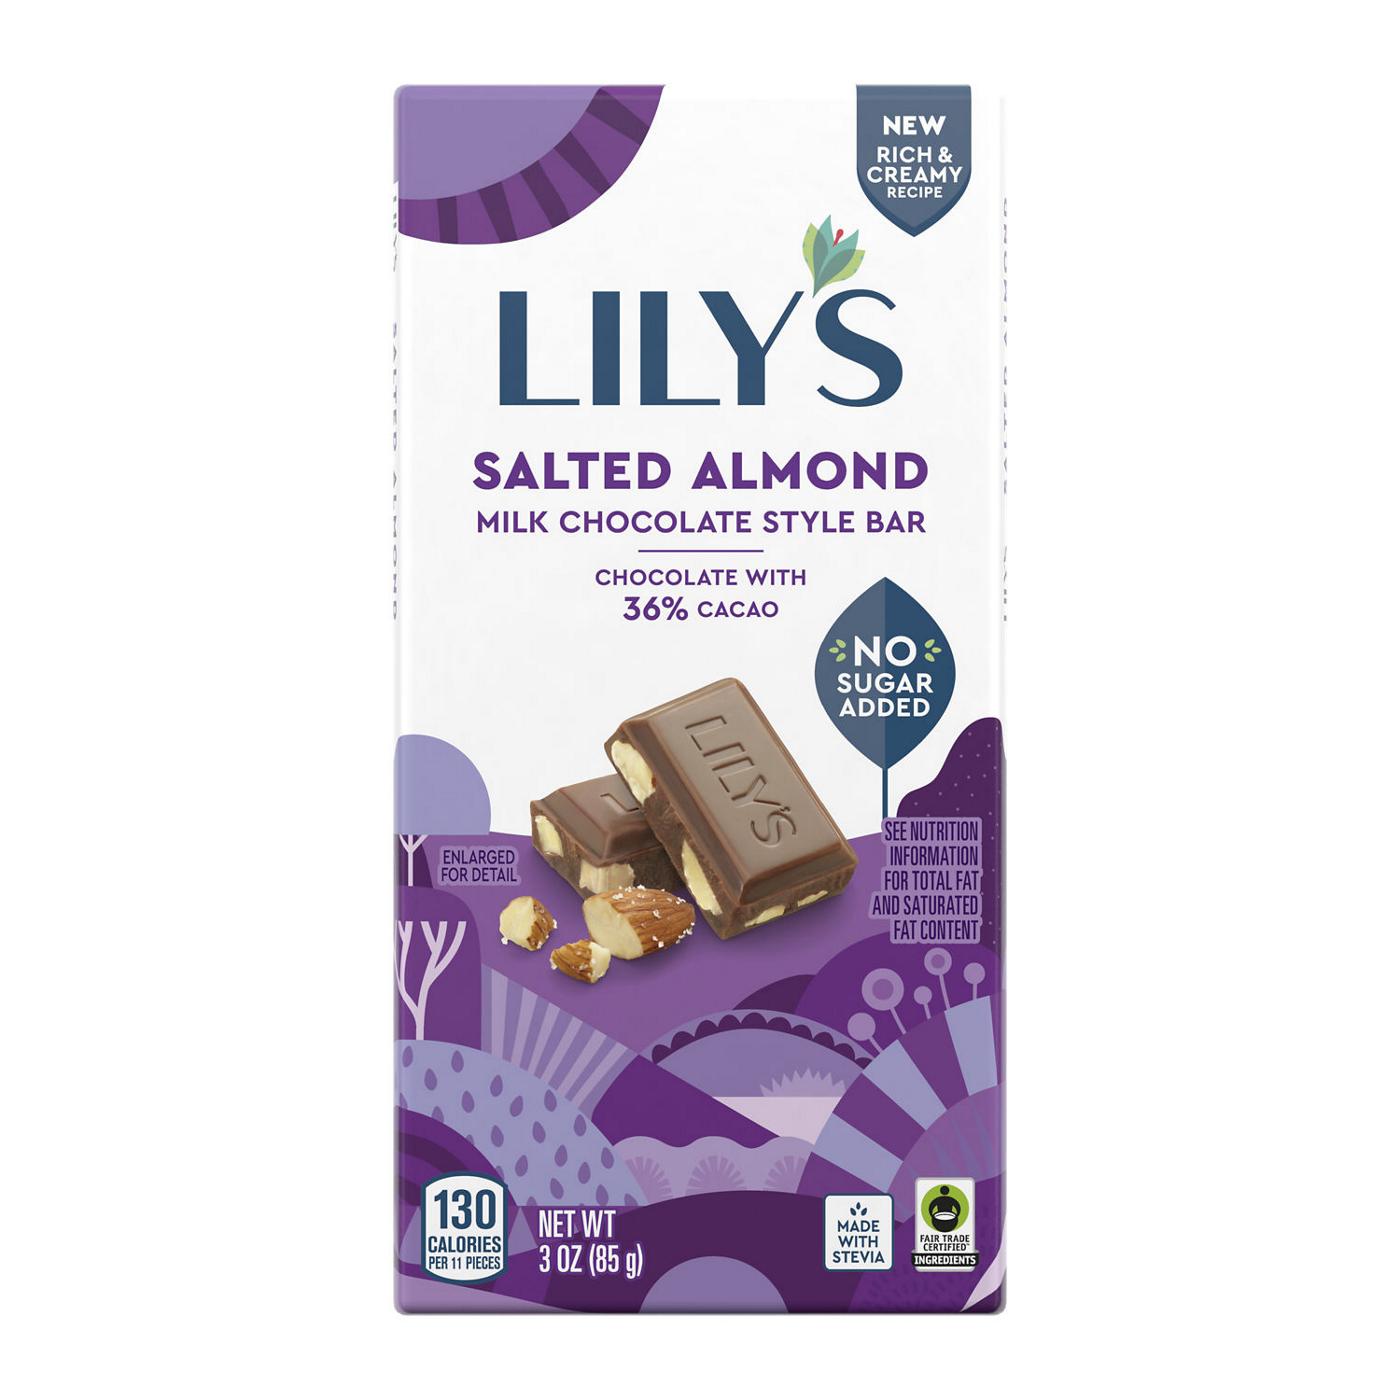 Lily's Salted Almond Milk Chocolate Style Bar; image 1 of 6